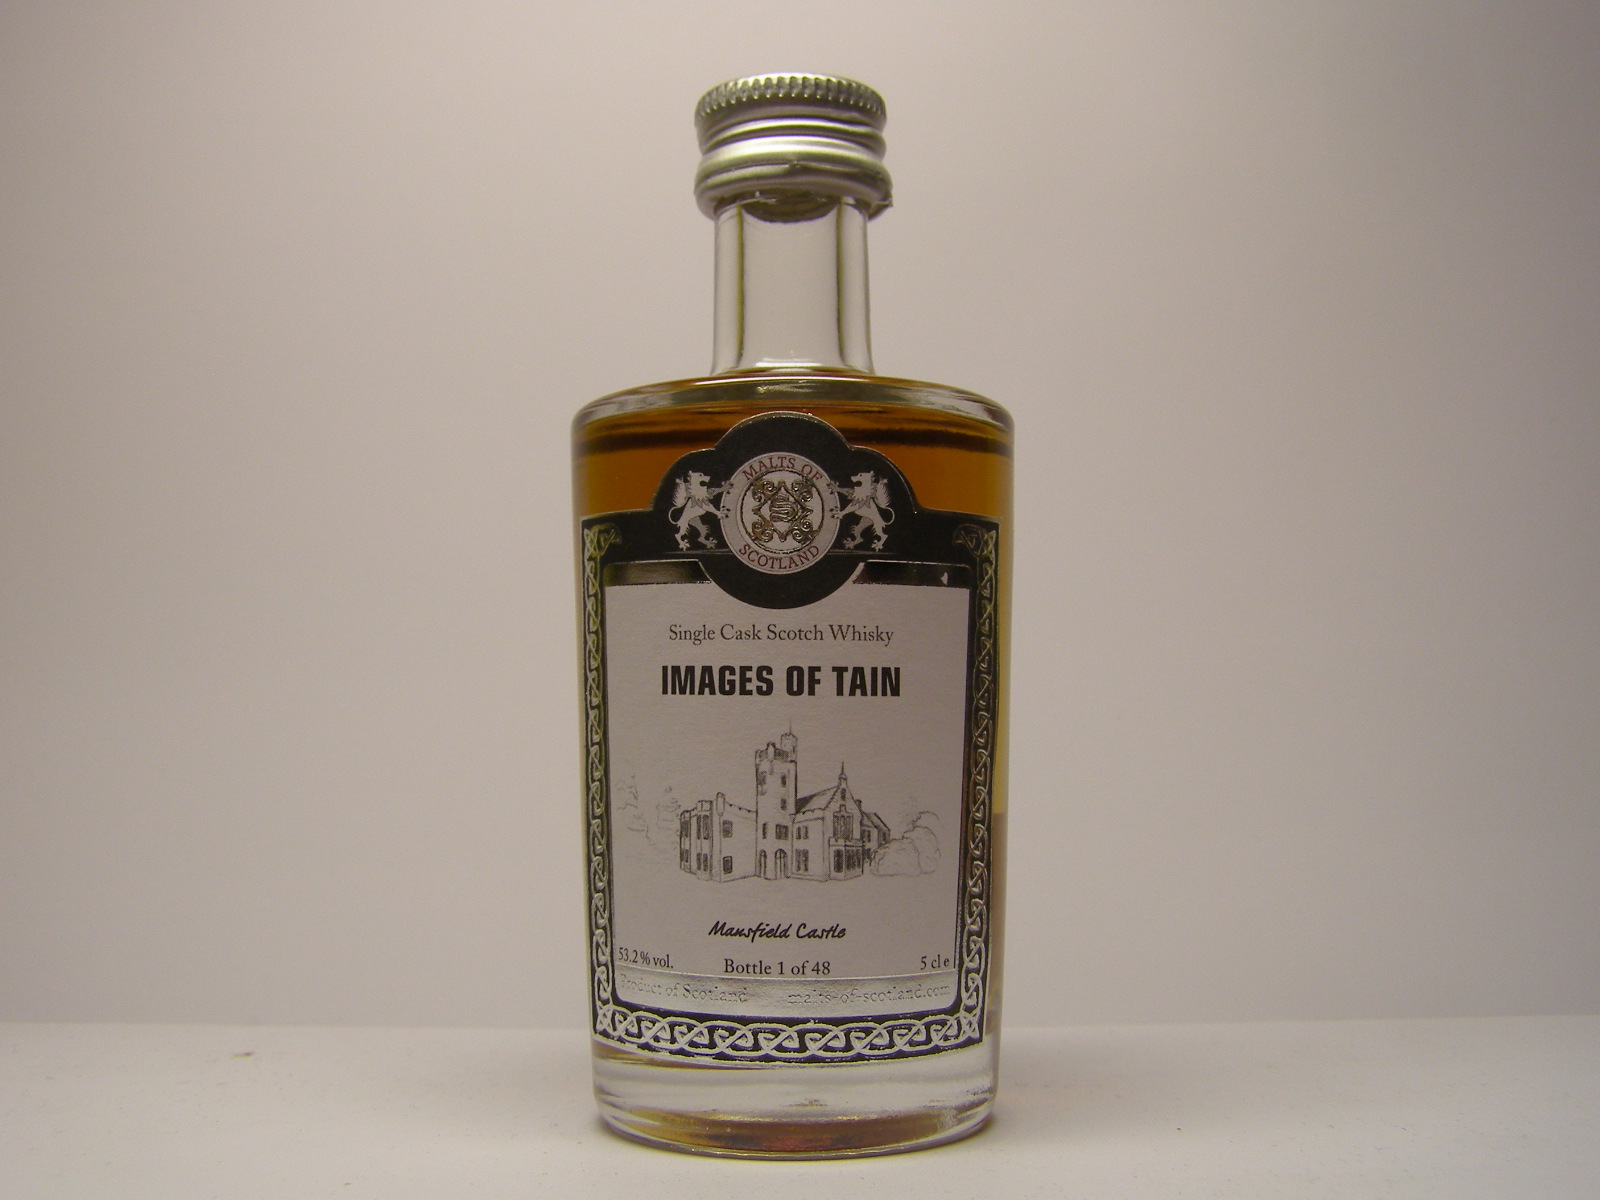 IMAGES OF TAIN SCSW "Malts of Scotland" 5cle 53,2%vol. 